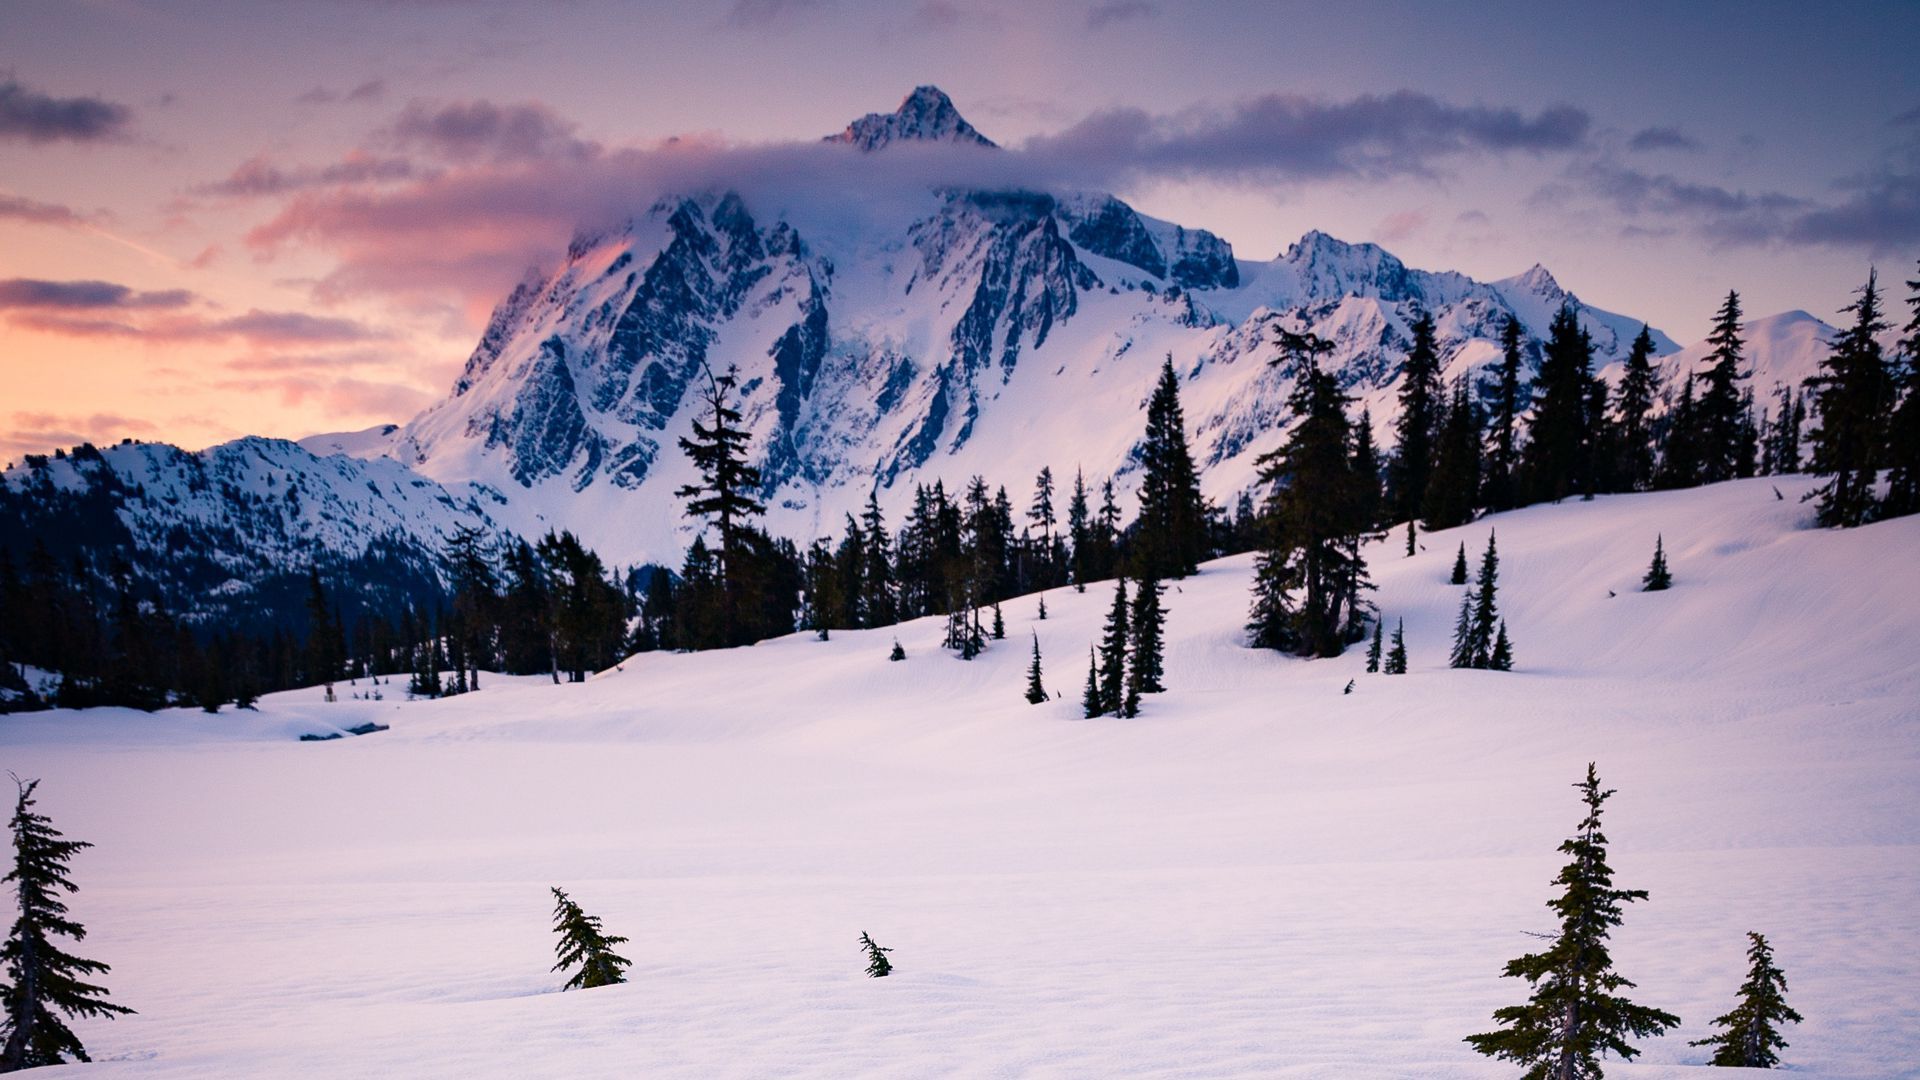 Download wallpaper 1920x1080 mountain, snow, trees, clouds, winter